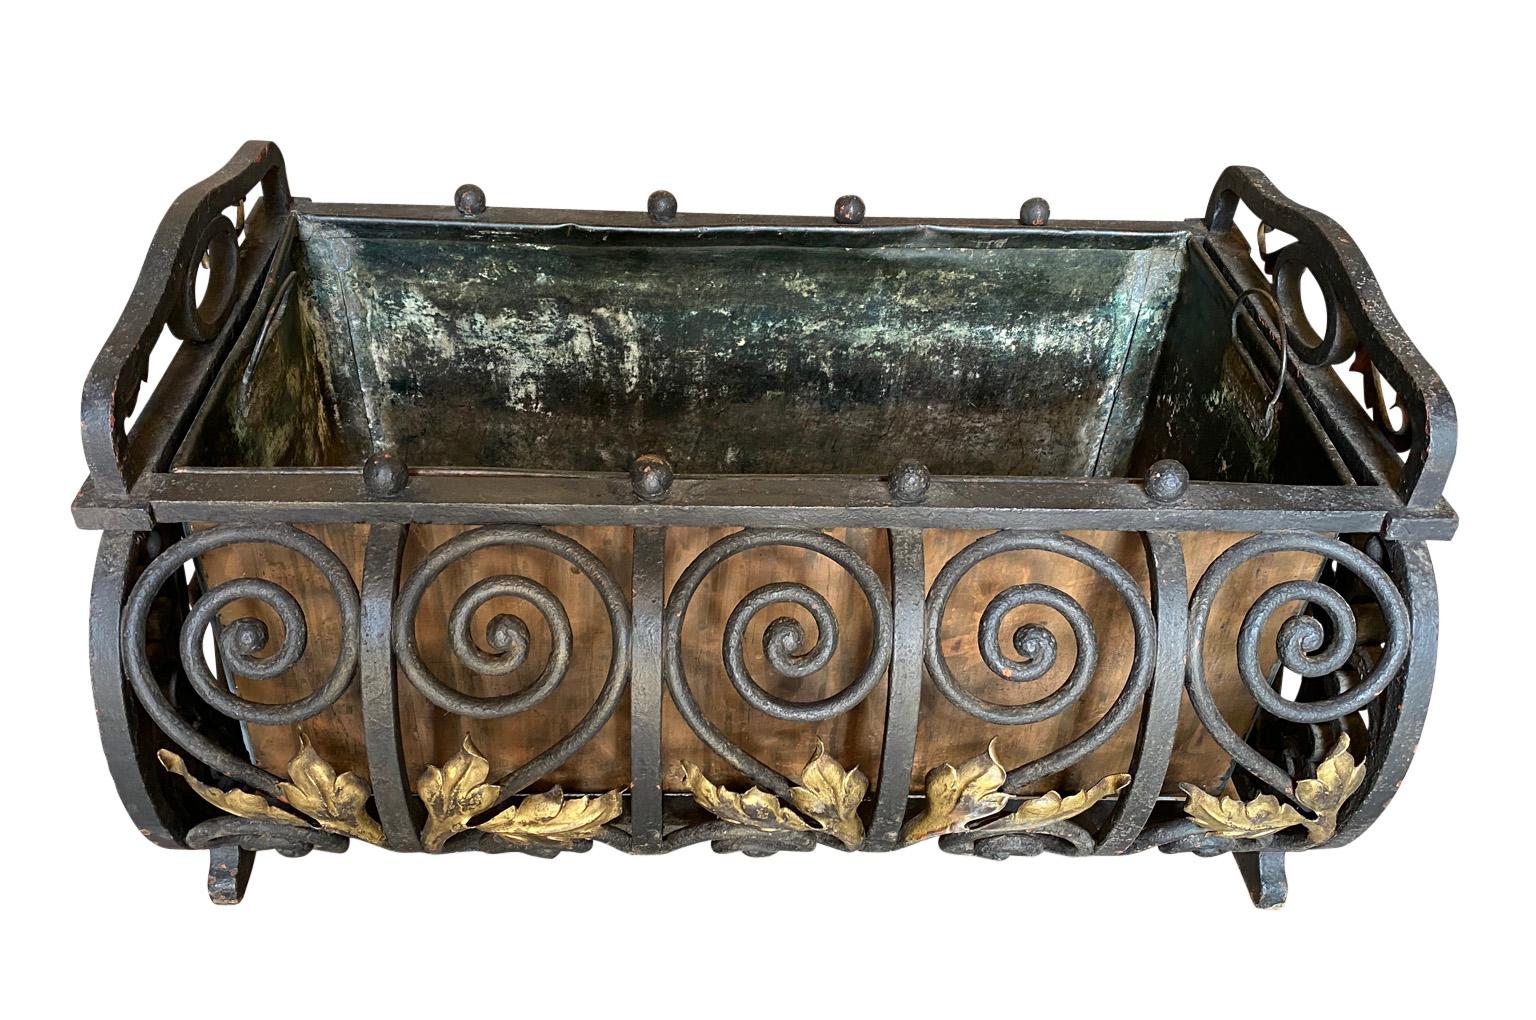 A lovely 19th century French Louis XIV style Jardiniere handsomely crafted from iron with its original copper liner. Perfect for any interior or garden.